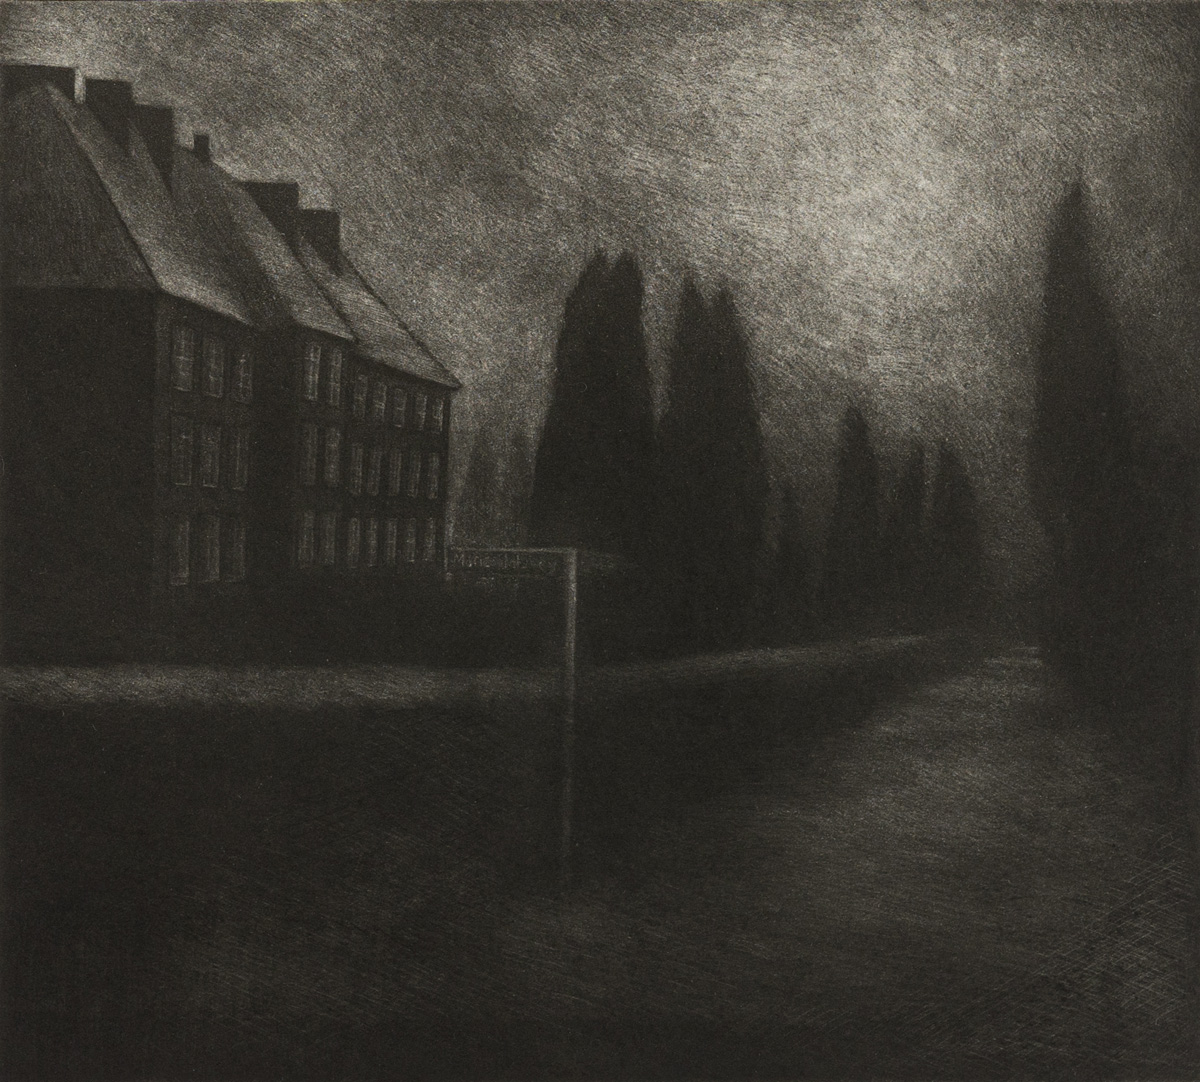 line etching of a school